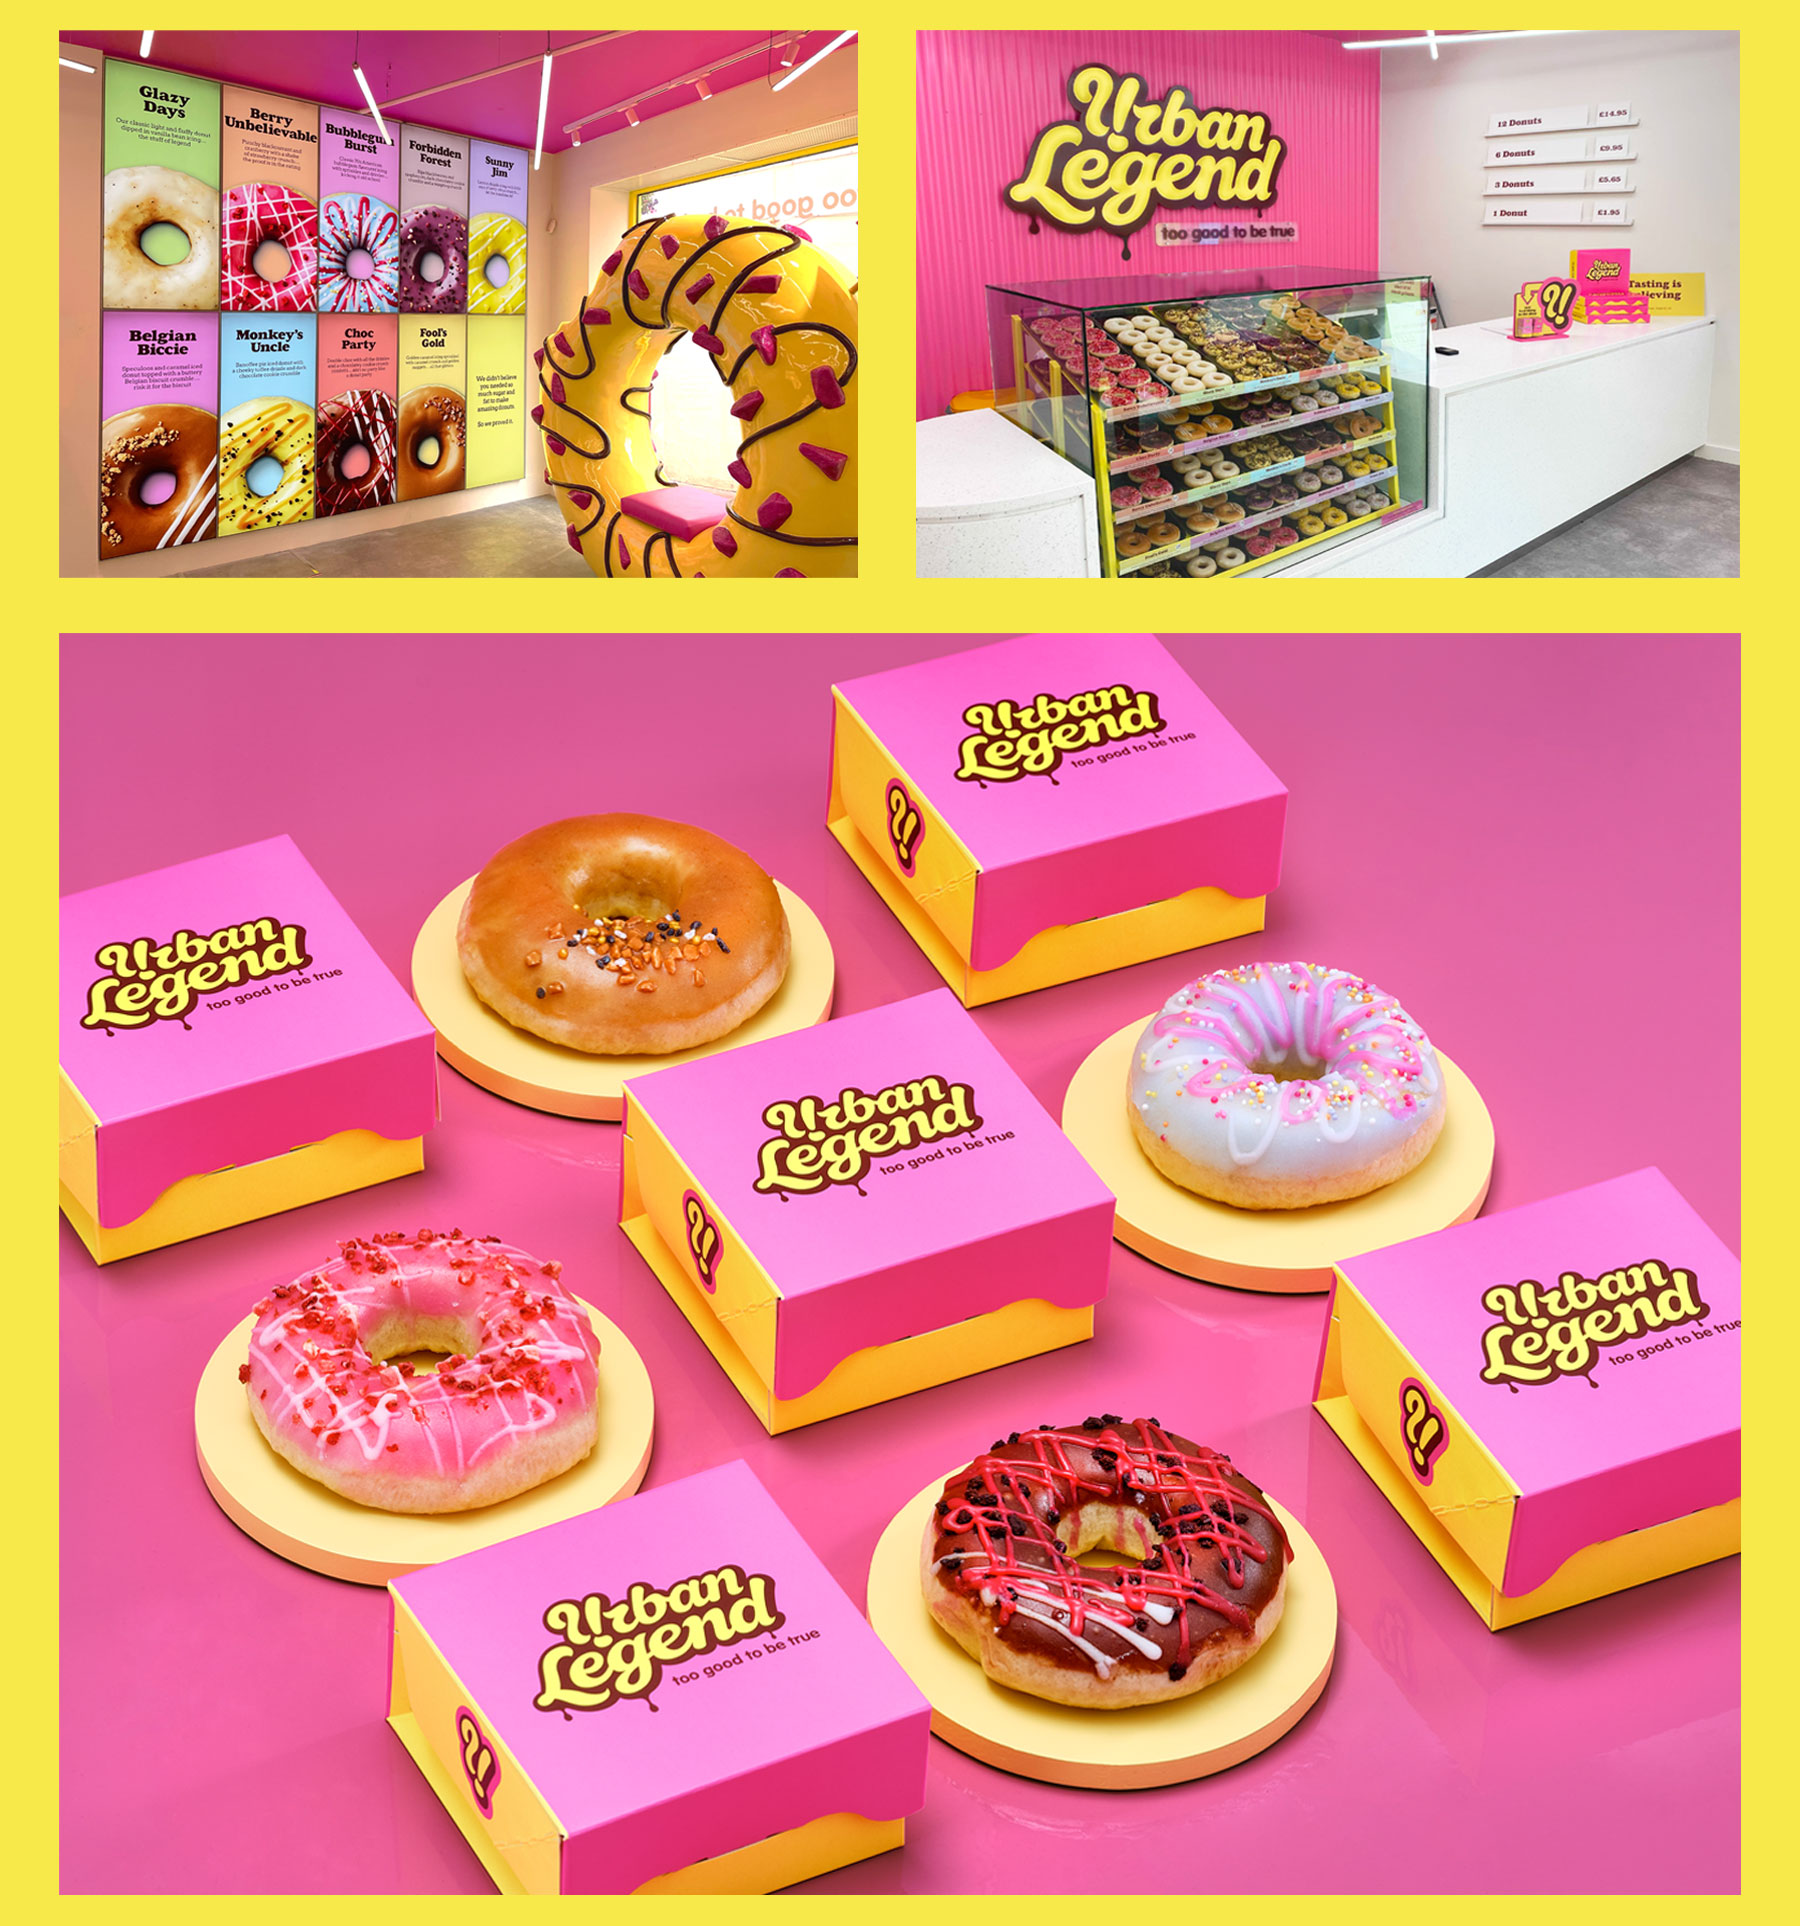 Various photography showing the menu inside an urban legend store, the counter of the urban legend store and some single donut boxes alongside some urban legend donuts design by Biles Hendry